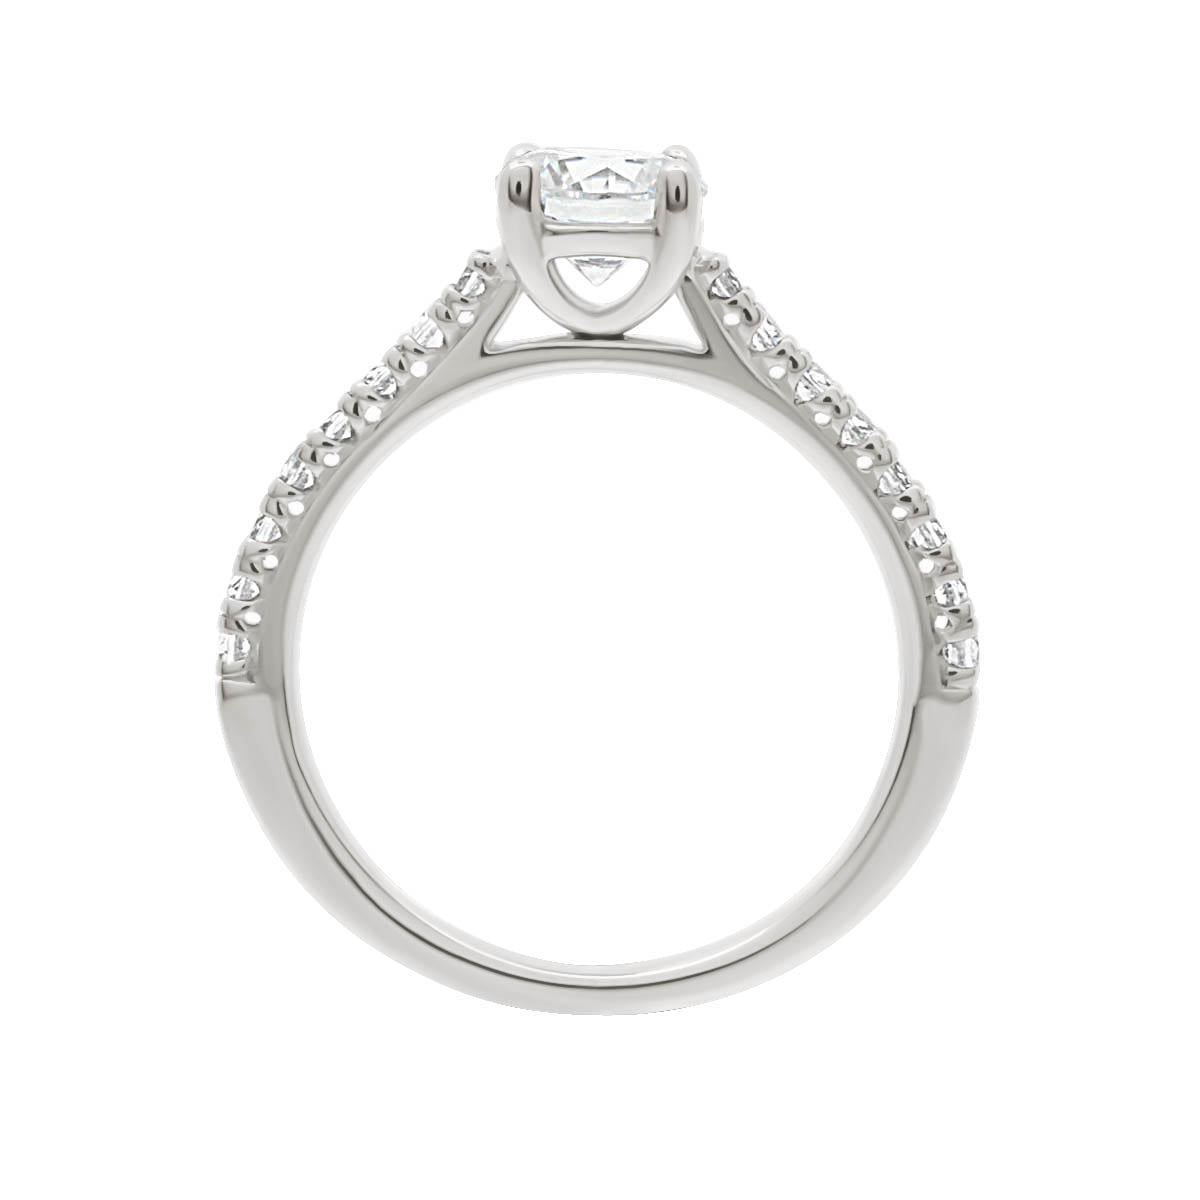 Castell Set Diamond Ring made from platinum in an upright position